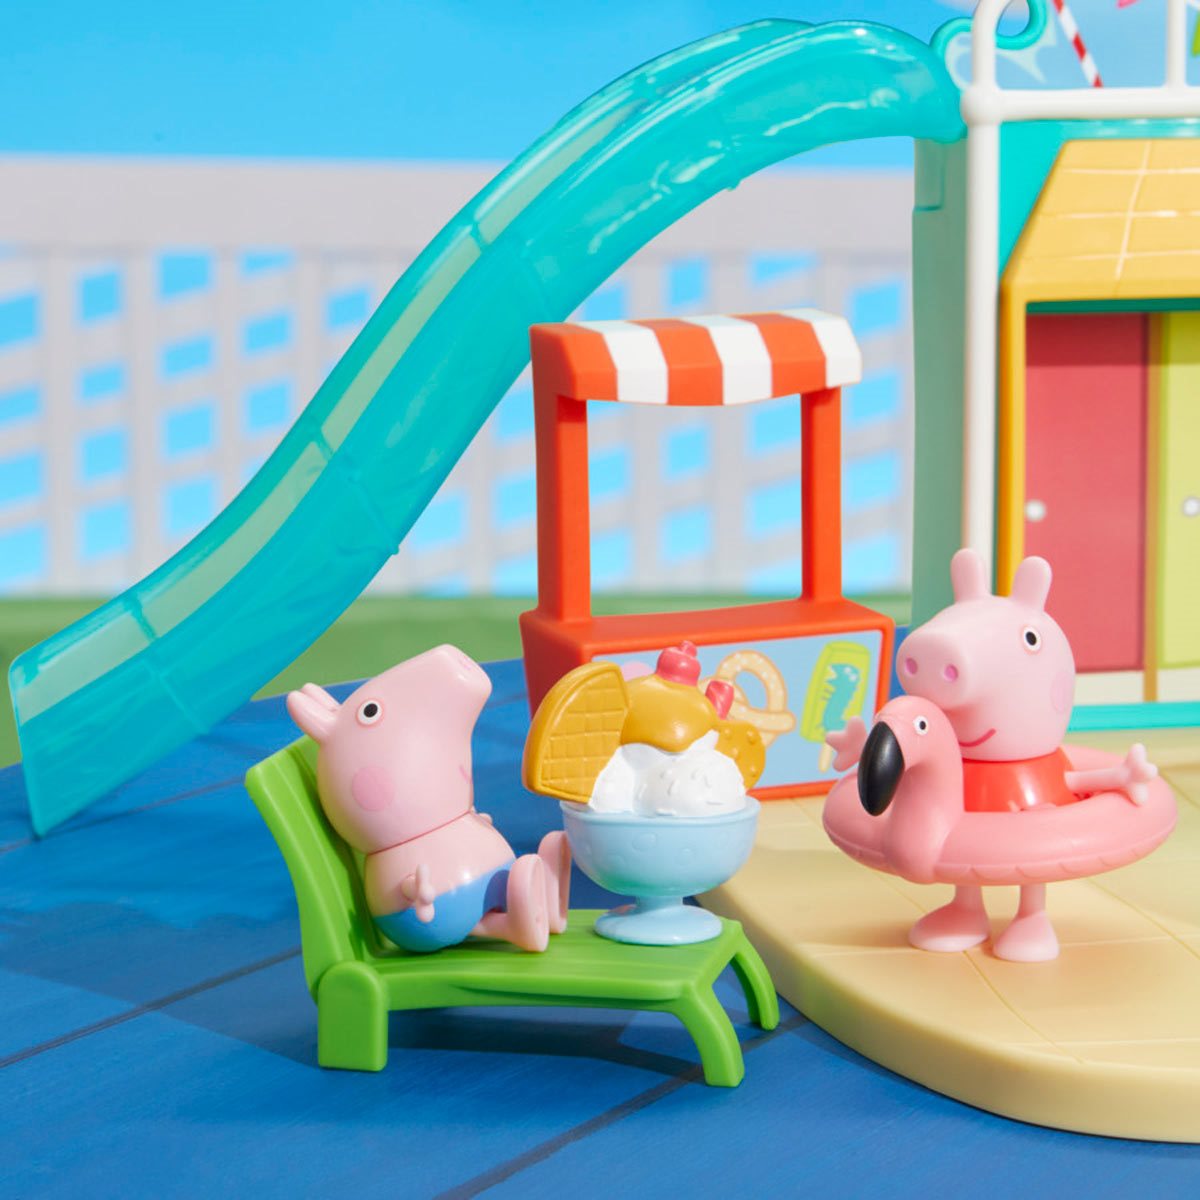 Peppa Pig Toys, Games, Collectibles & Playsets - Peppa Pig